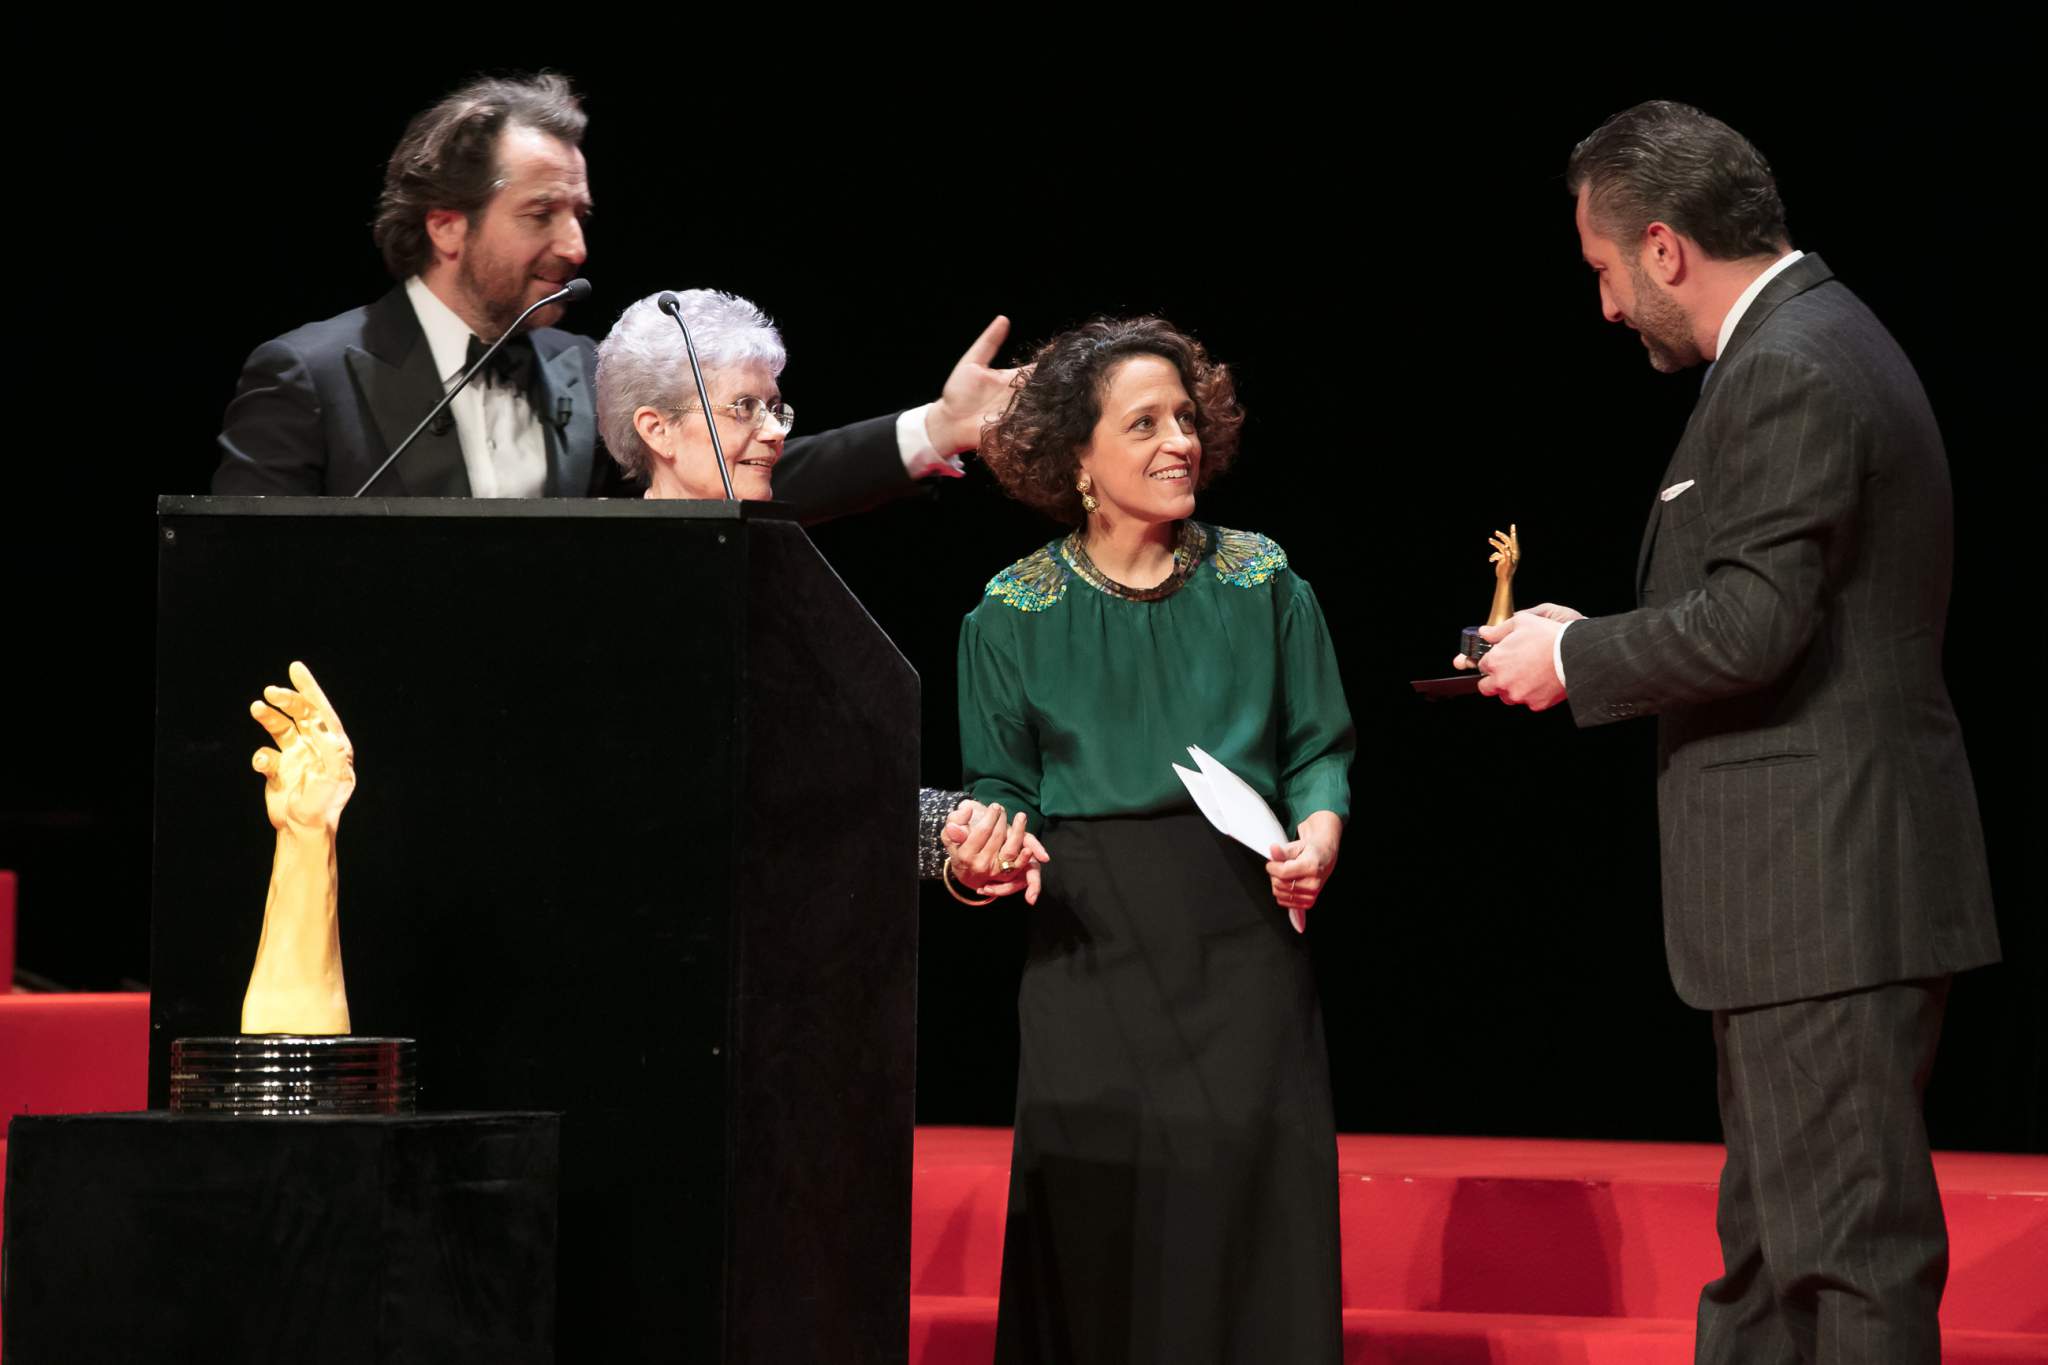 Edouard Baer (MC), Suzanne Rohr and Anita Porchet (winners of Special Jury Prize 2017) and Aurel Bacs (President of the jury of the GPHG 2017)